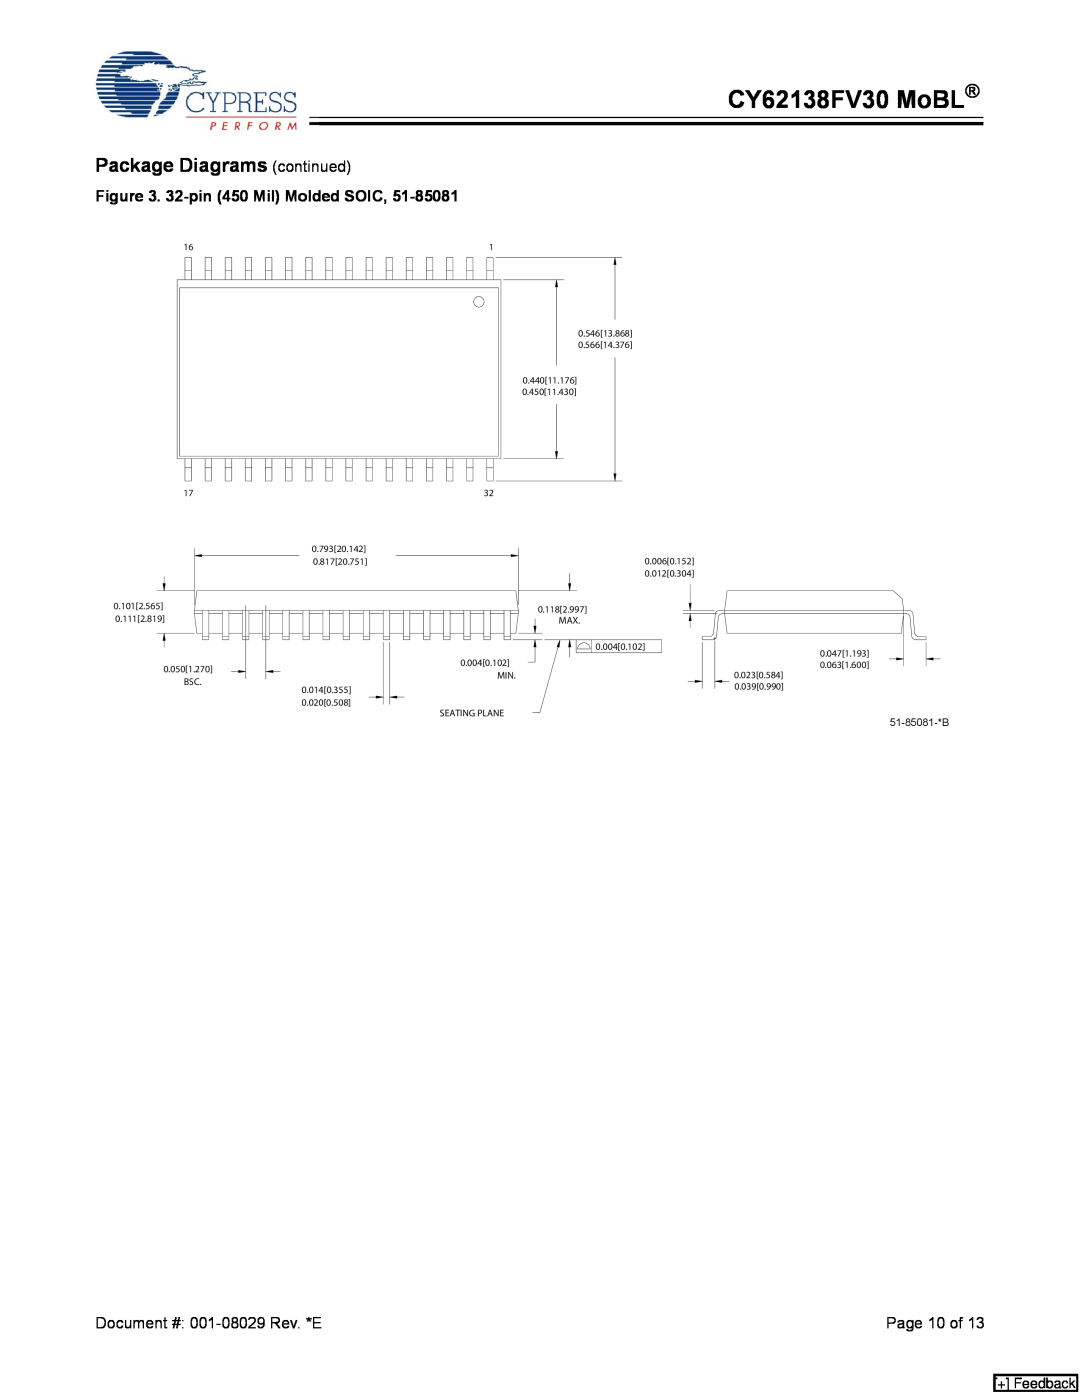 Cypress CY62138CV25 manual CY62138FV30 MoBL, Package Diagrams continued, 32-pin 450 Mil Molded SOIC, Page 10 of, + Feedback 